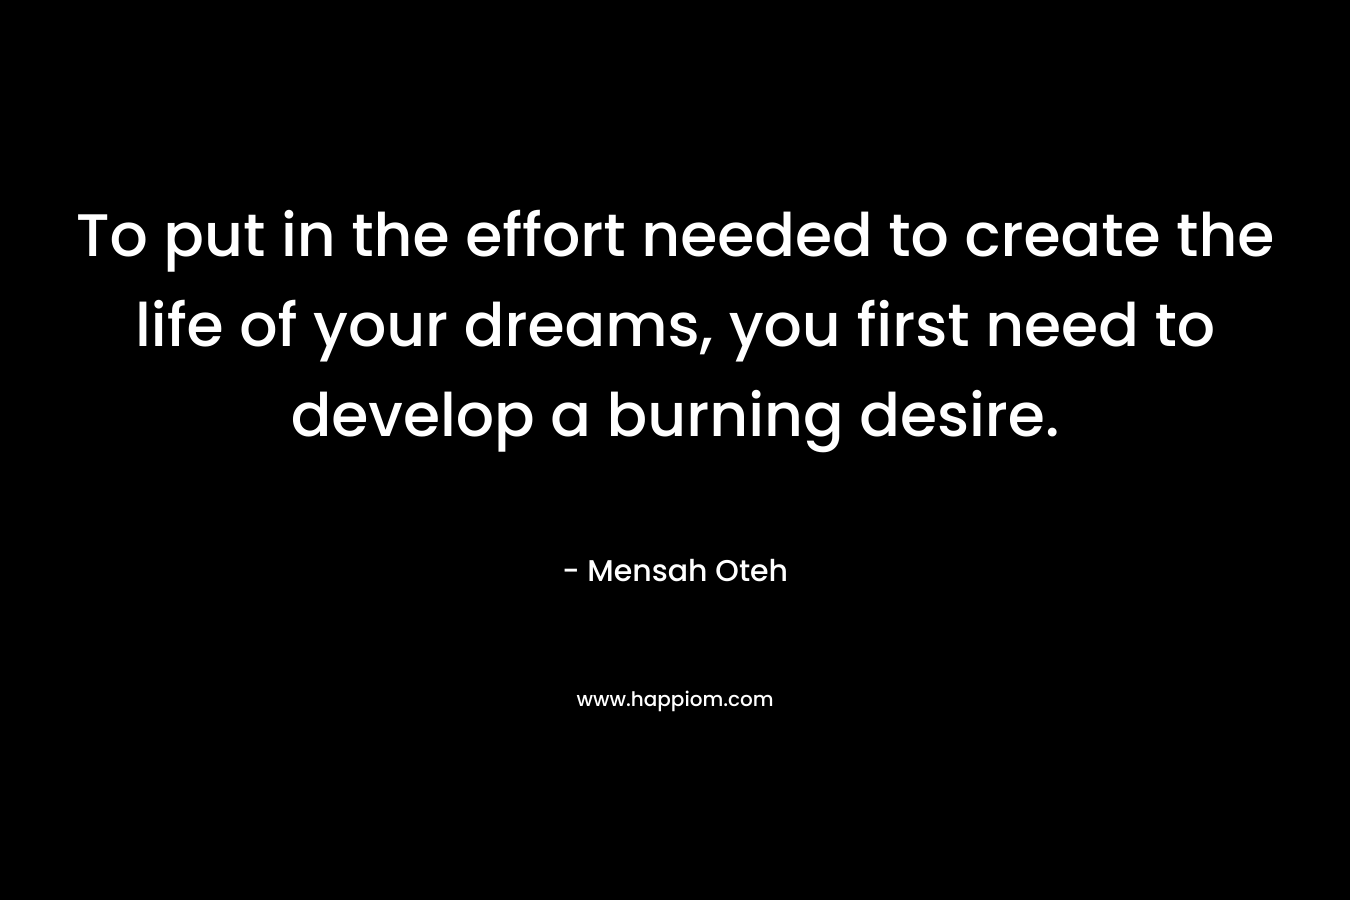 To put in the effort needed to create the life of your dreams, you first need to develop a burning desire.